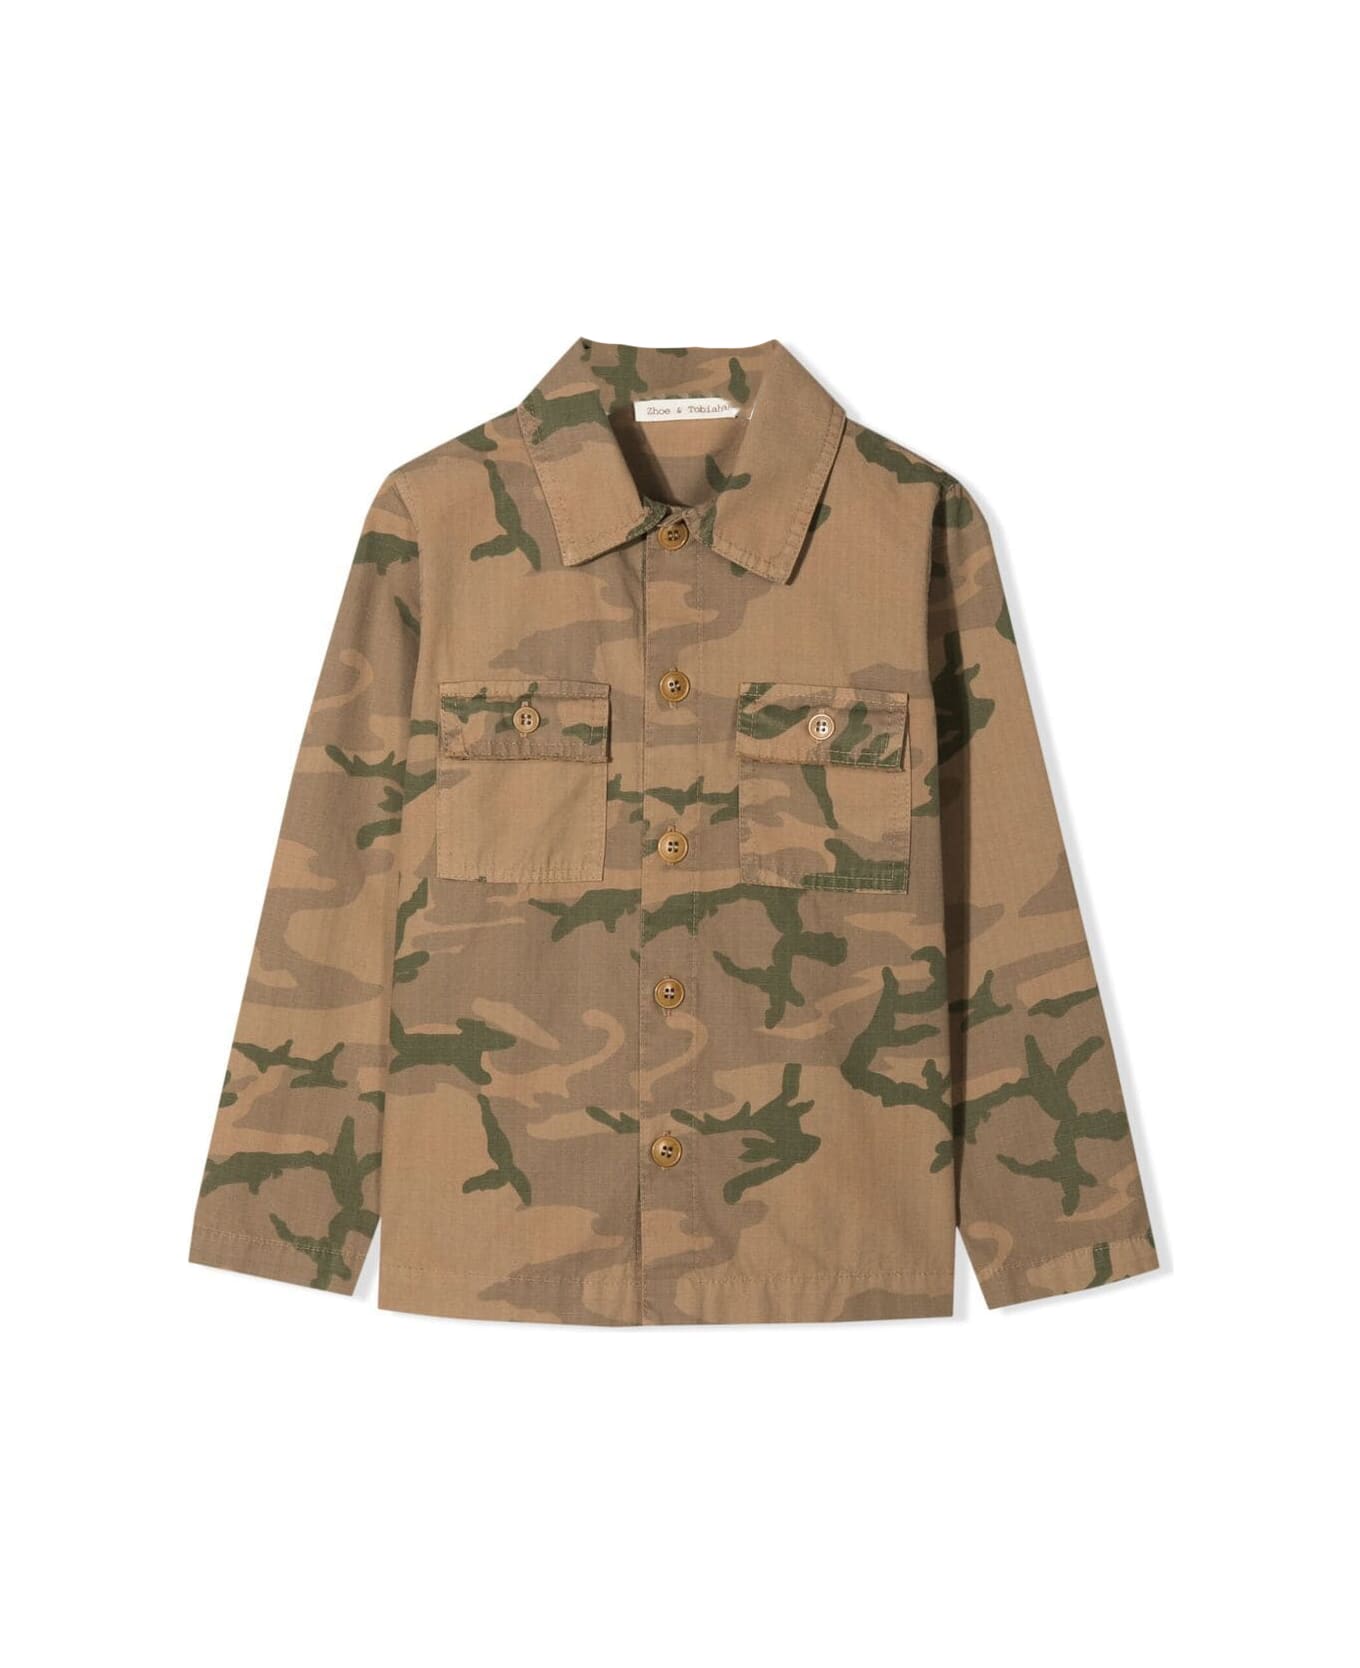 Zhoe & Tobiah Shirt-jacket With Camouflage Print - Variante unica コート＆ジャケット